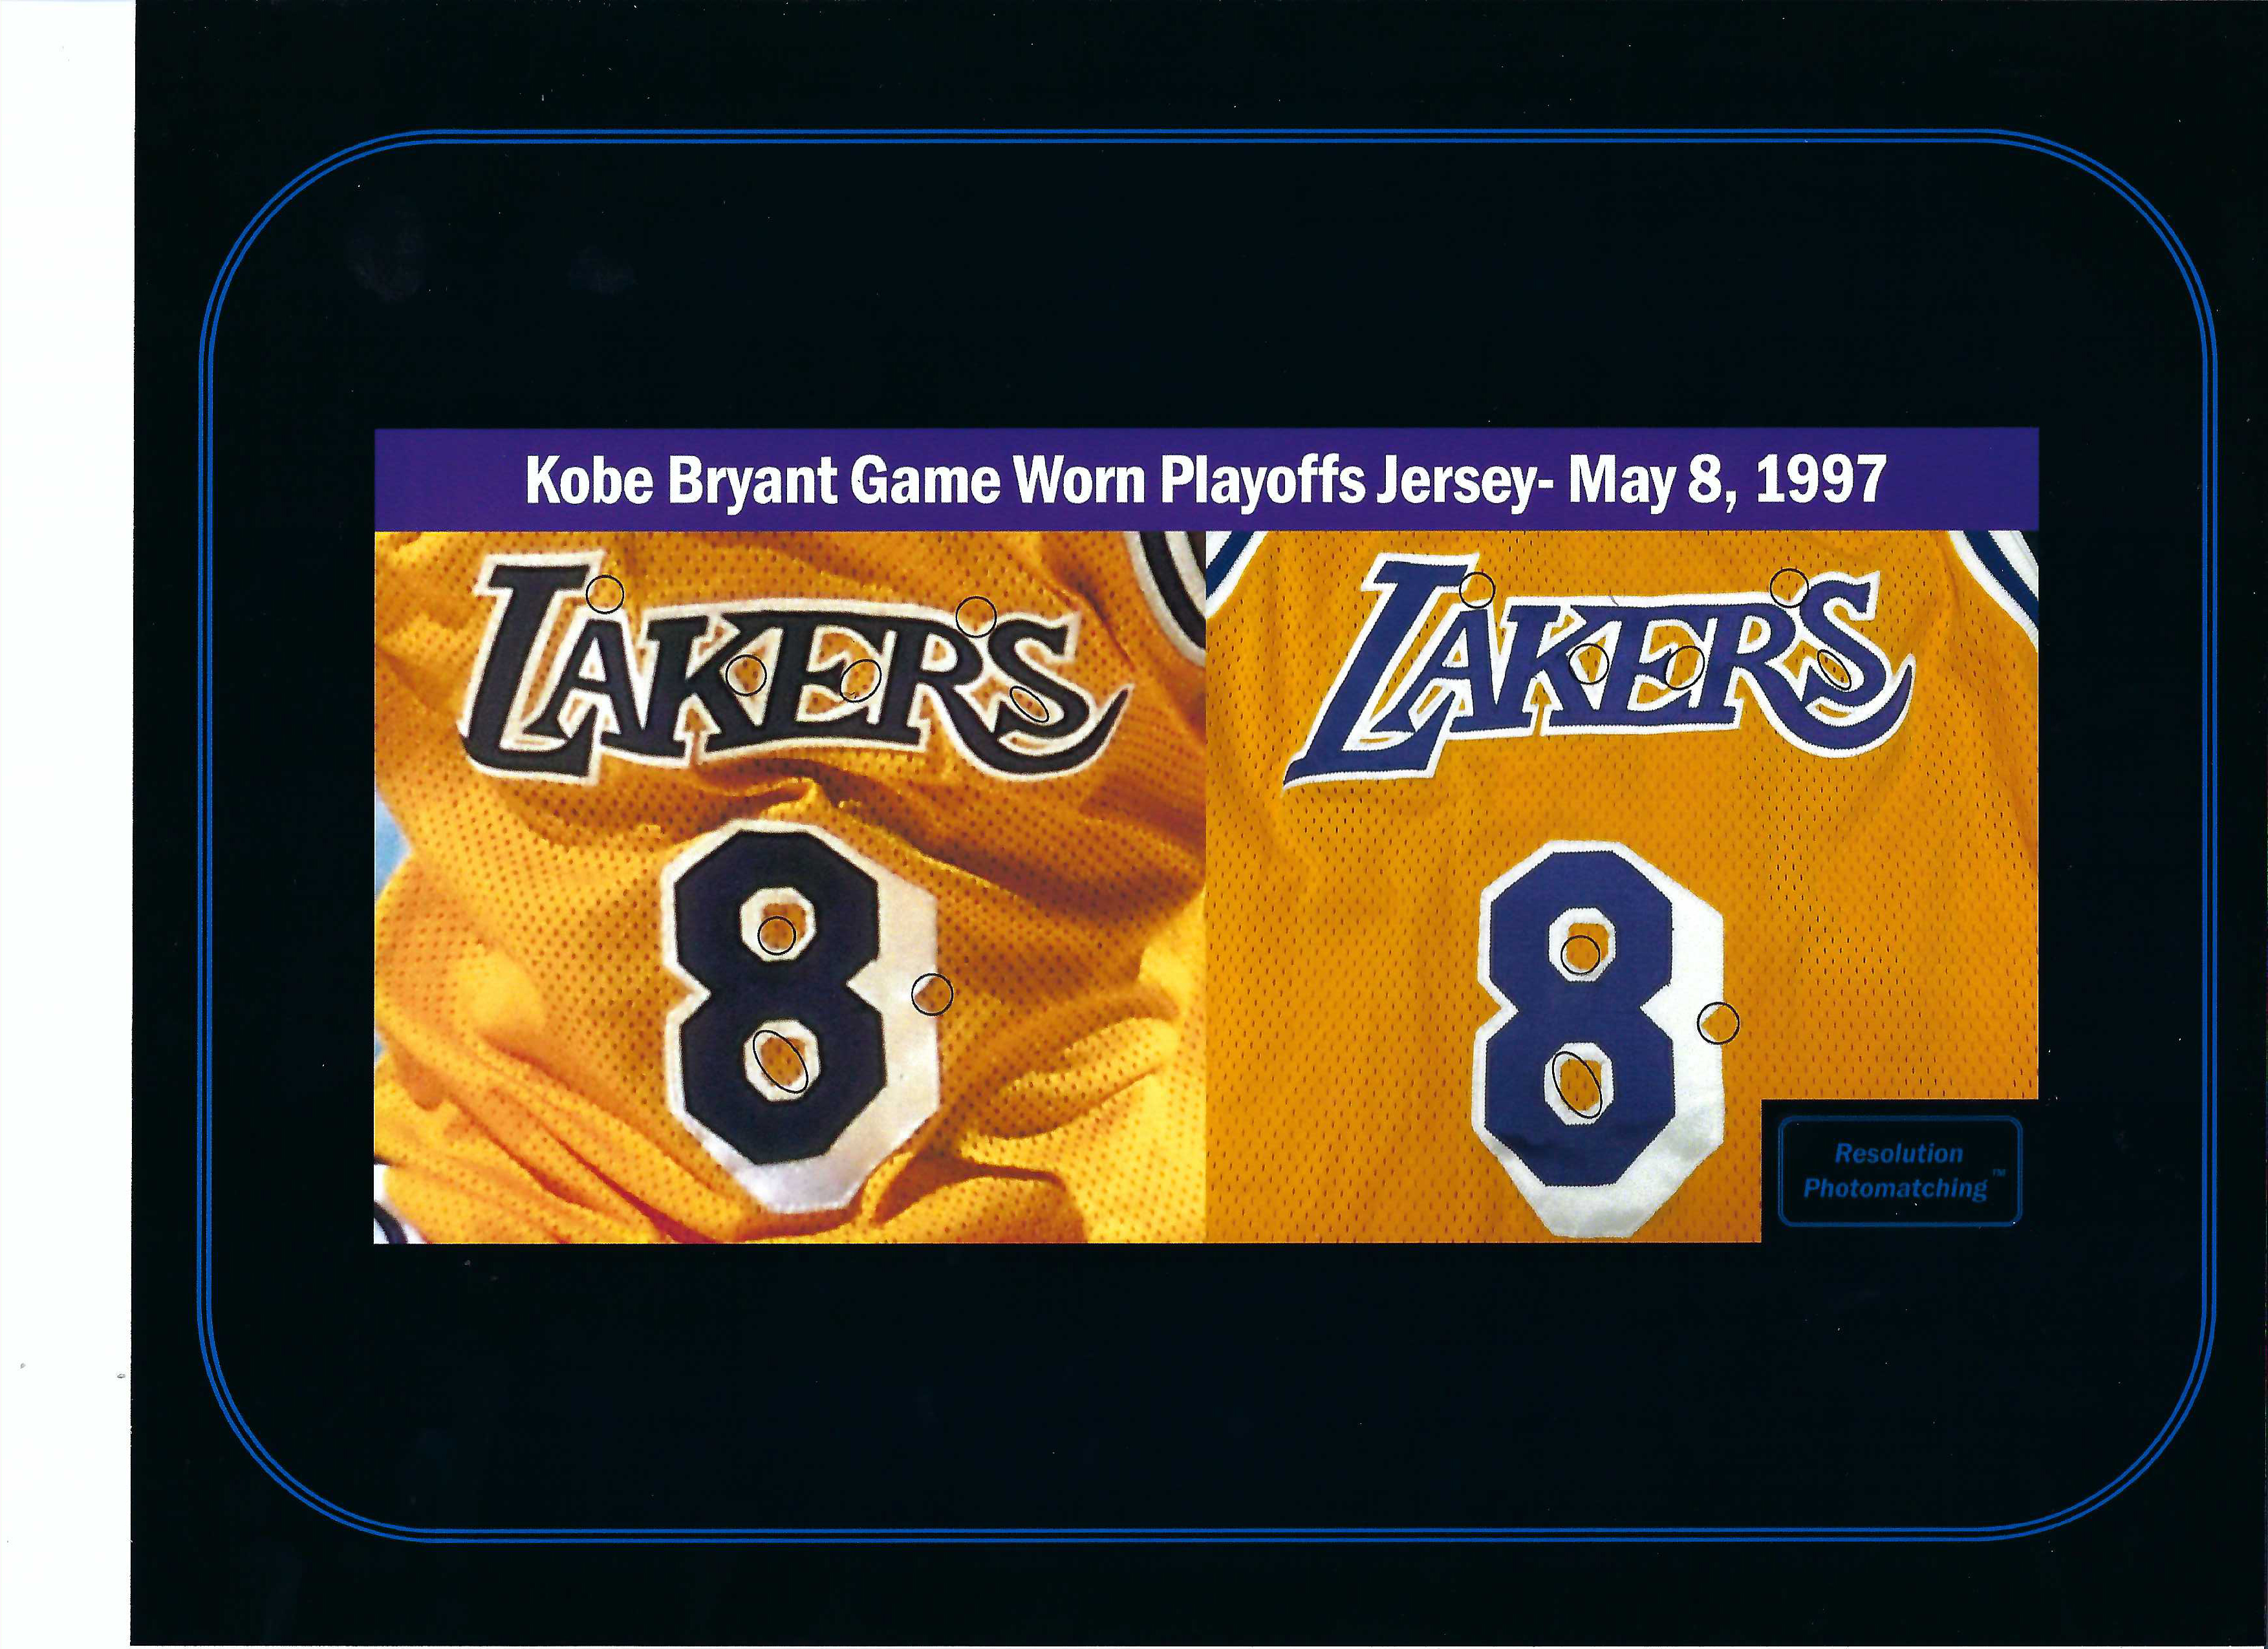 Lot Detail - NEWLY UNCOVERED 1996-97 KOBE BRYANT L.A. LAKERS GAME WORN  ROOKIE HOME JERSEY PHOTOMATCHED TO 5 GAMES - ONLY KNOWN KOBE ROOKIE JERSEY  MATCHED TO PLAYOFFS! - MEIGRAY, RESOLUTION & SPORTS INVESTORS LOA'S